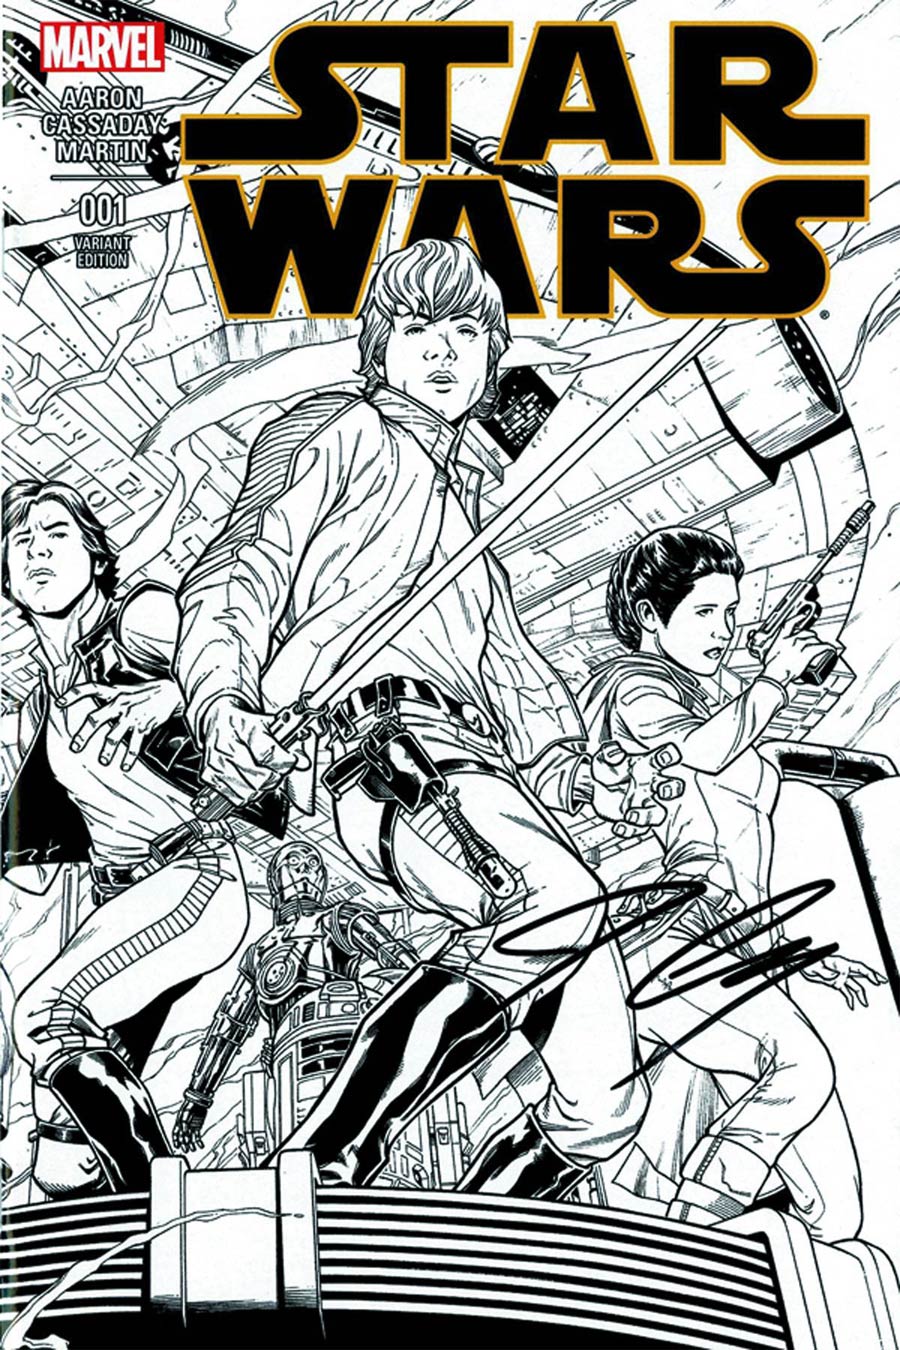 Star Wars Vol 4 #1 Cover Z-Z-T DF Diamond In The Rough Edition Joe Quesada Black & White Variant Cover Signed By John Cassaday